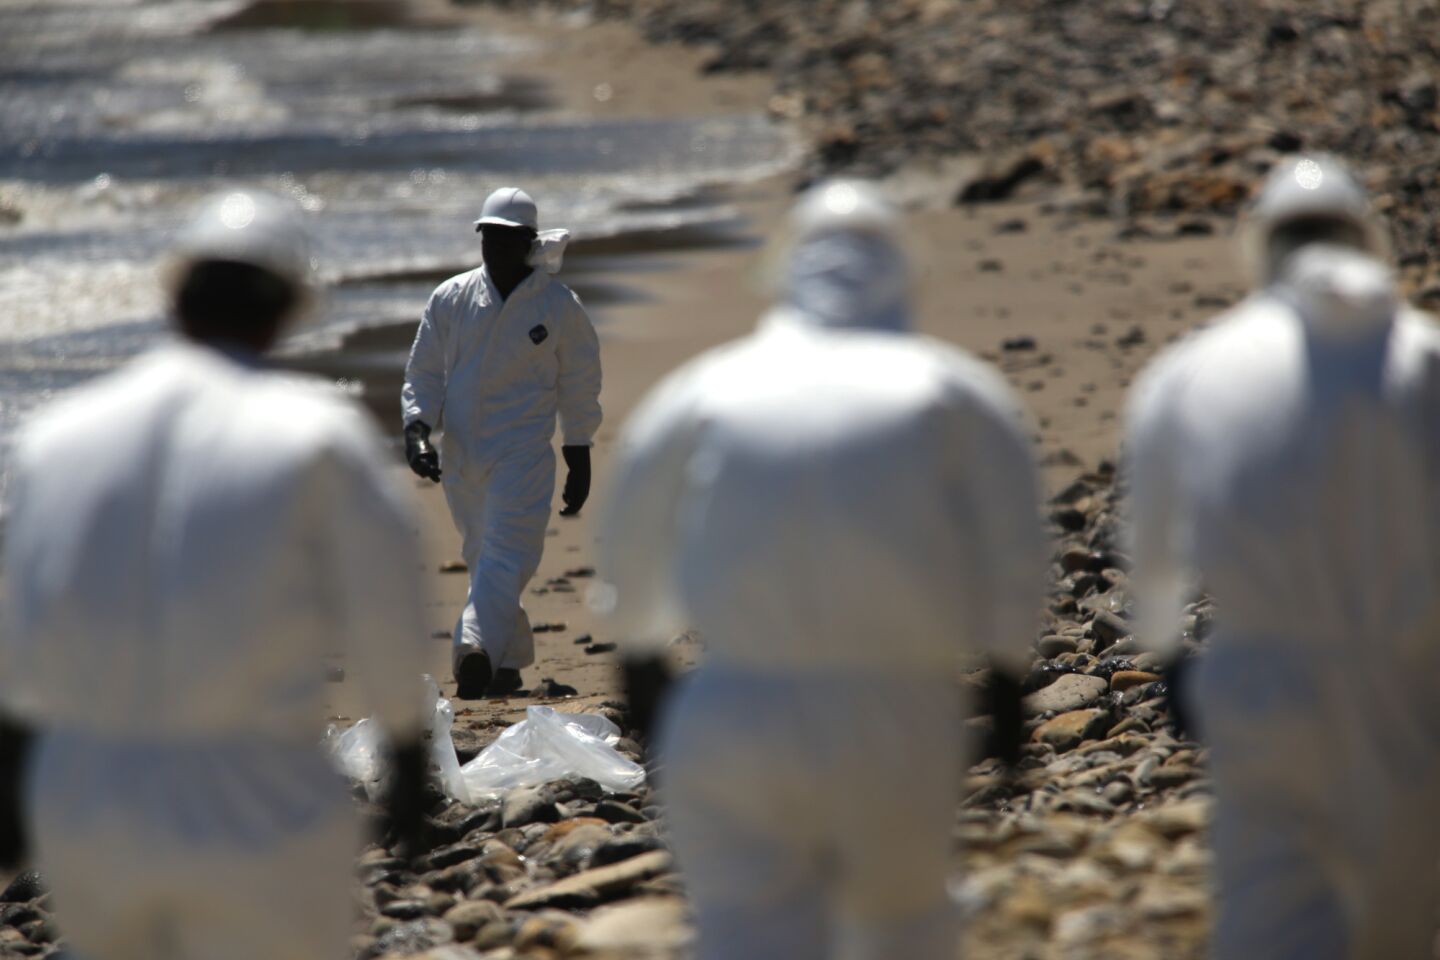 Suited workers continue to clean the shoreline at Refugio State Beach near Santa Barbara.